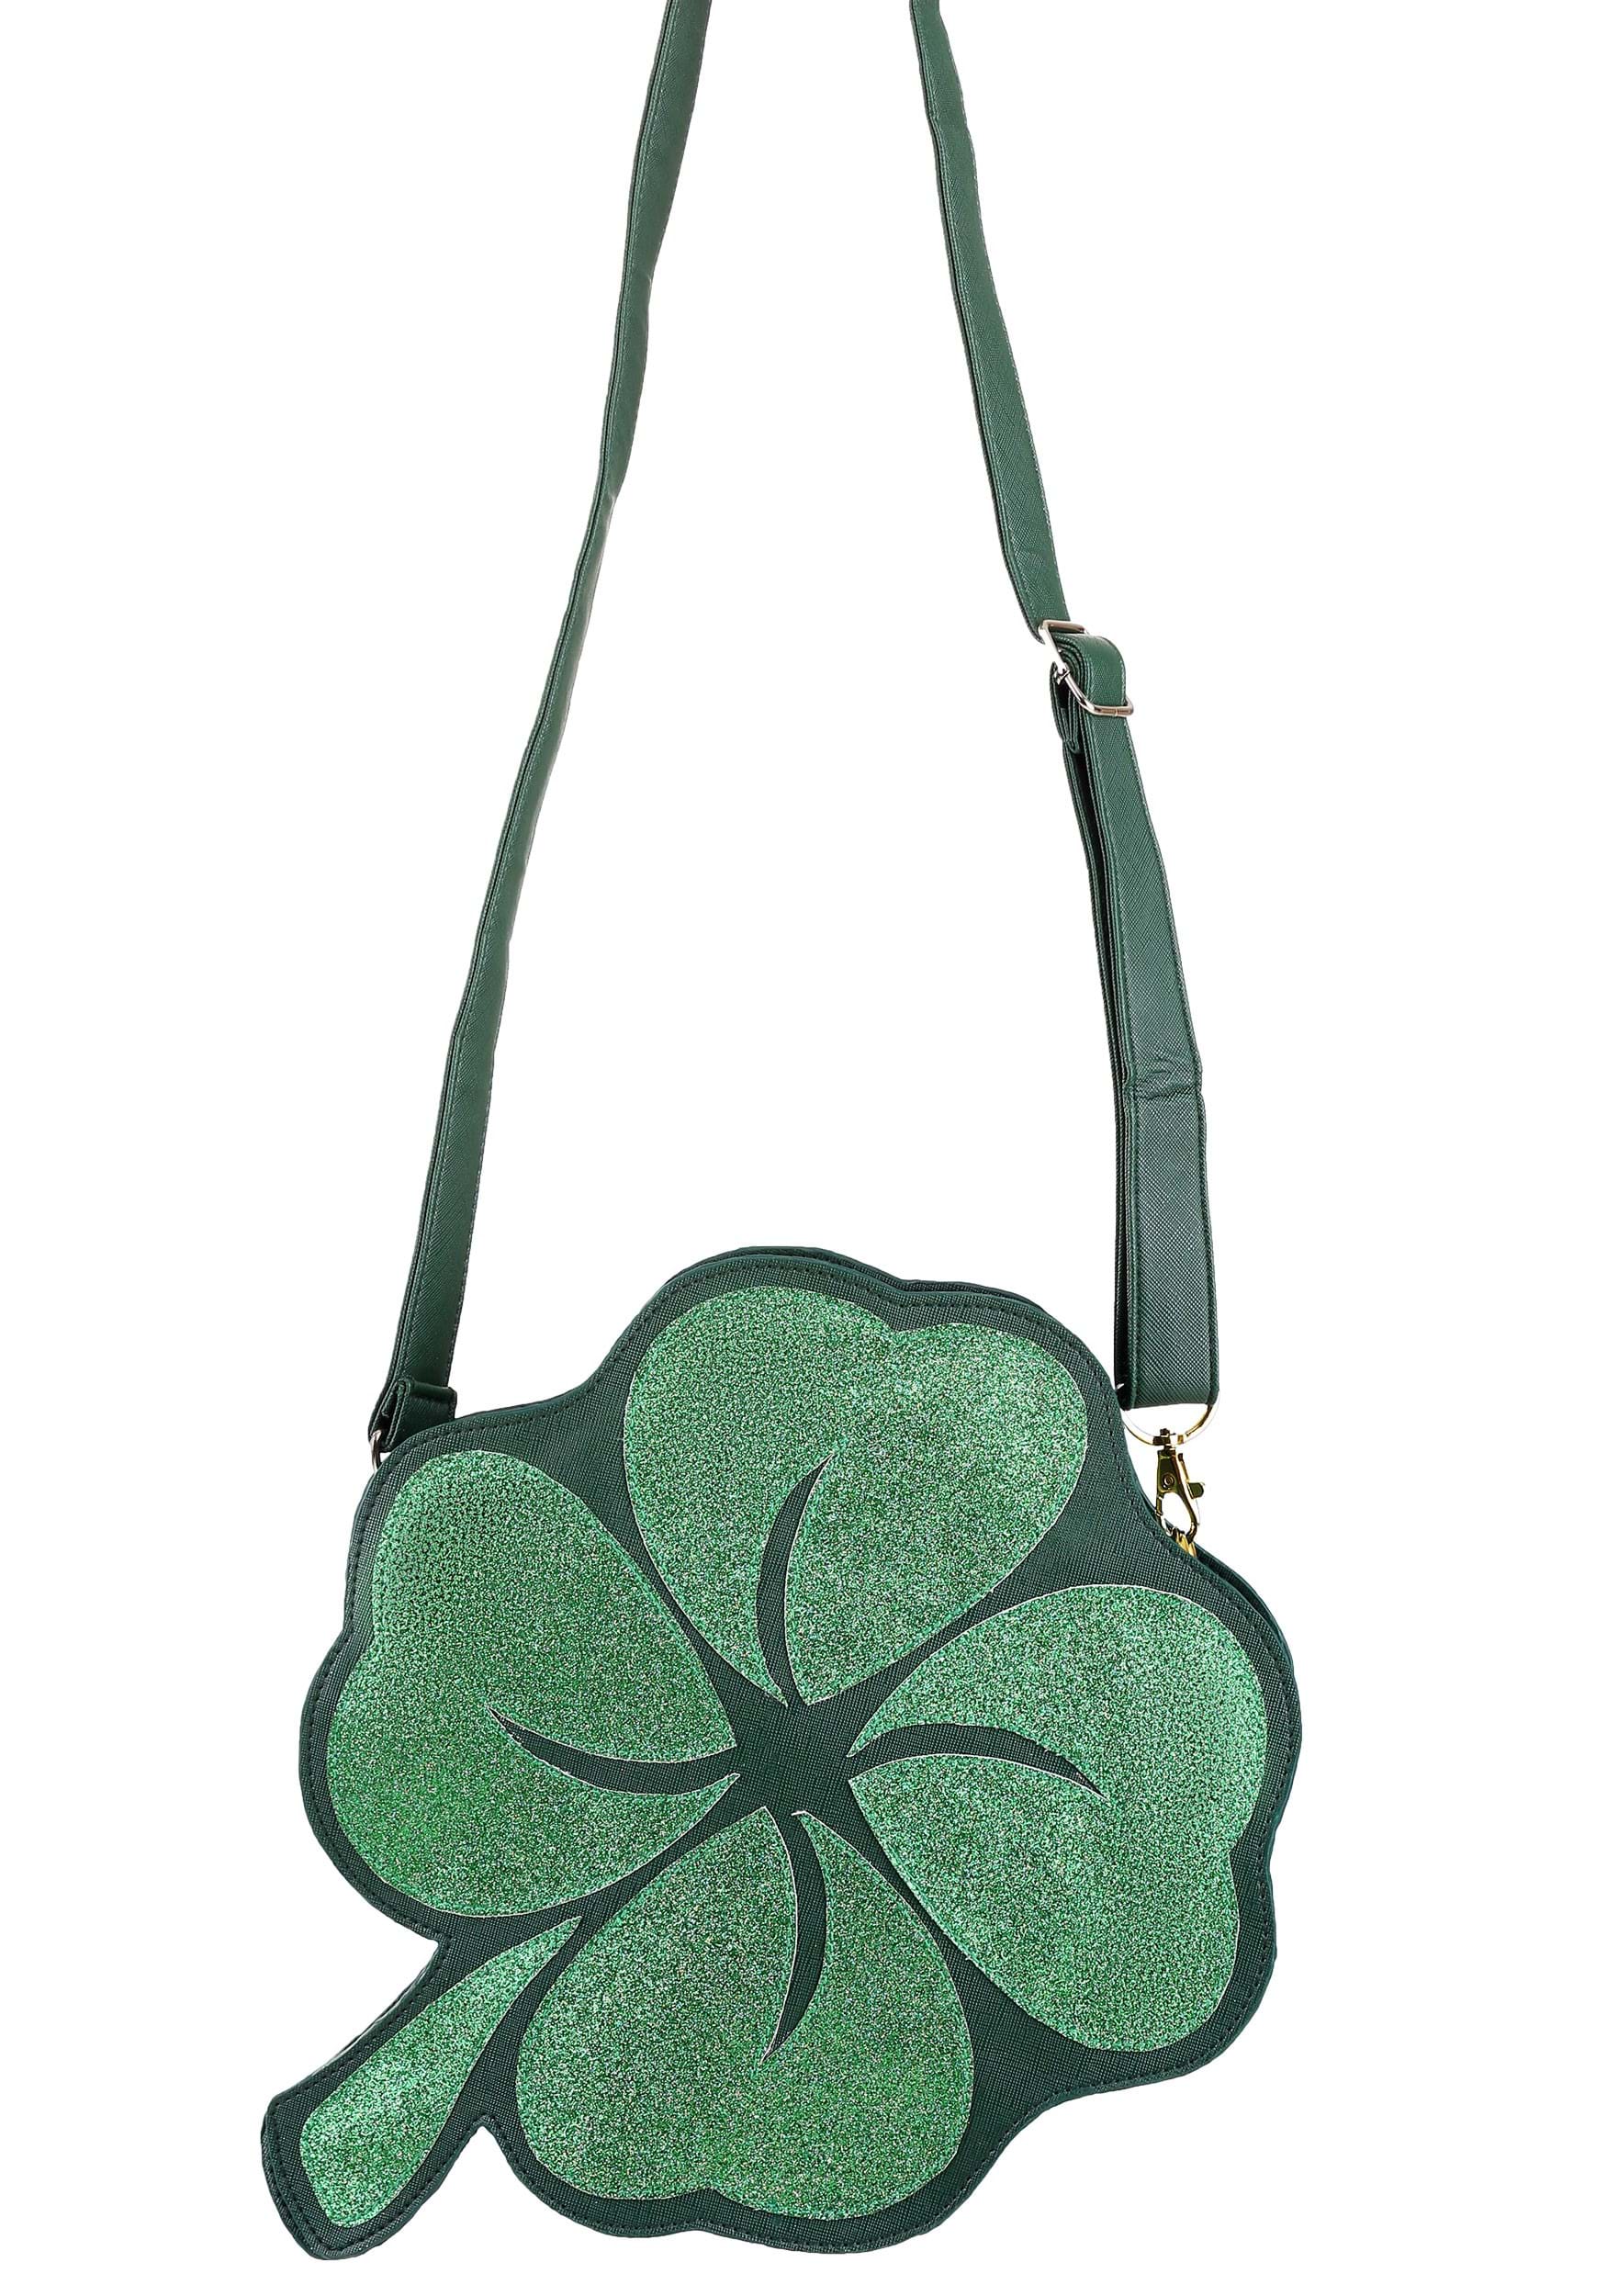 St Patricks Day Irish Shamrock Pattern Canvas Coin Purse Cute Change Pouch Wallet Bag Multifunctional Cellphone Bag with Handle